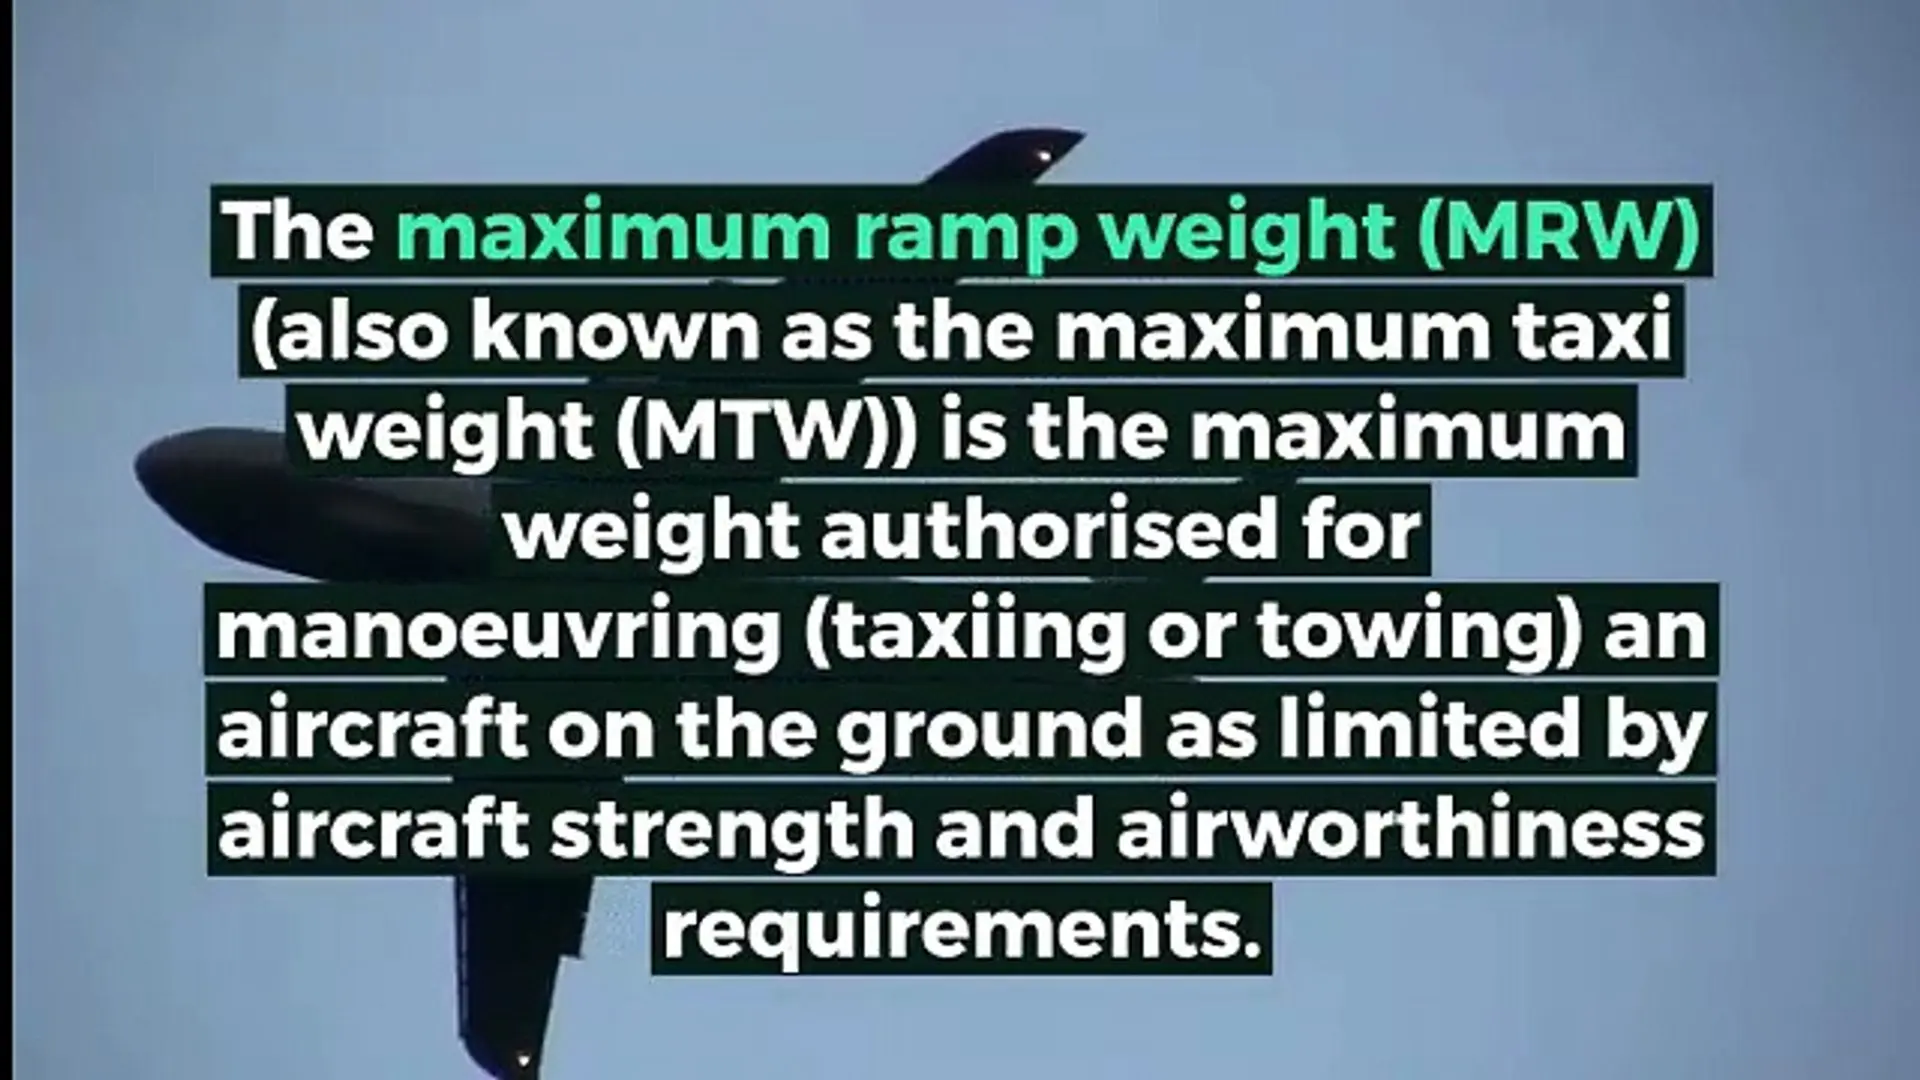 maximum taxi weight - Is Max taxi weight the same as Max takeoff weight